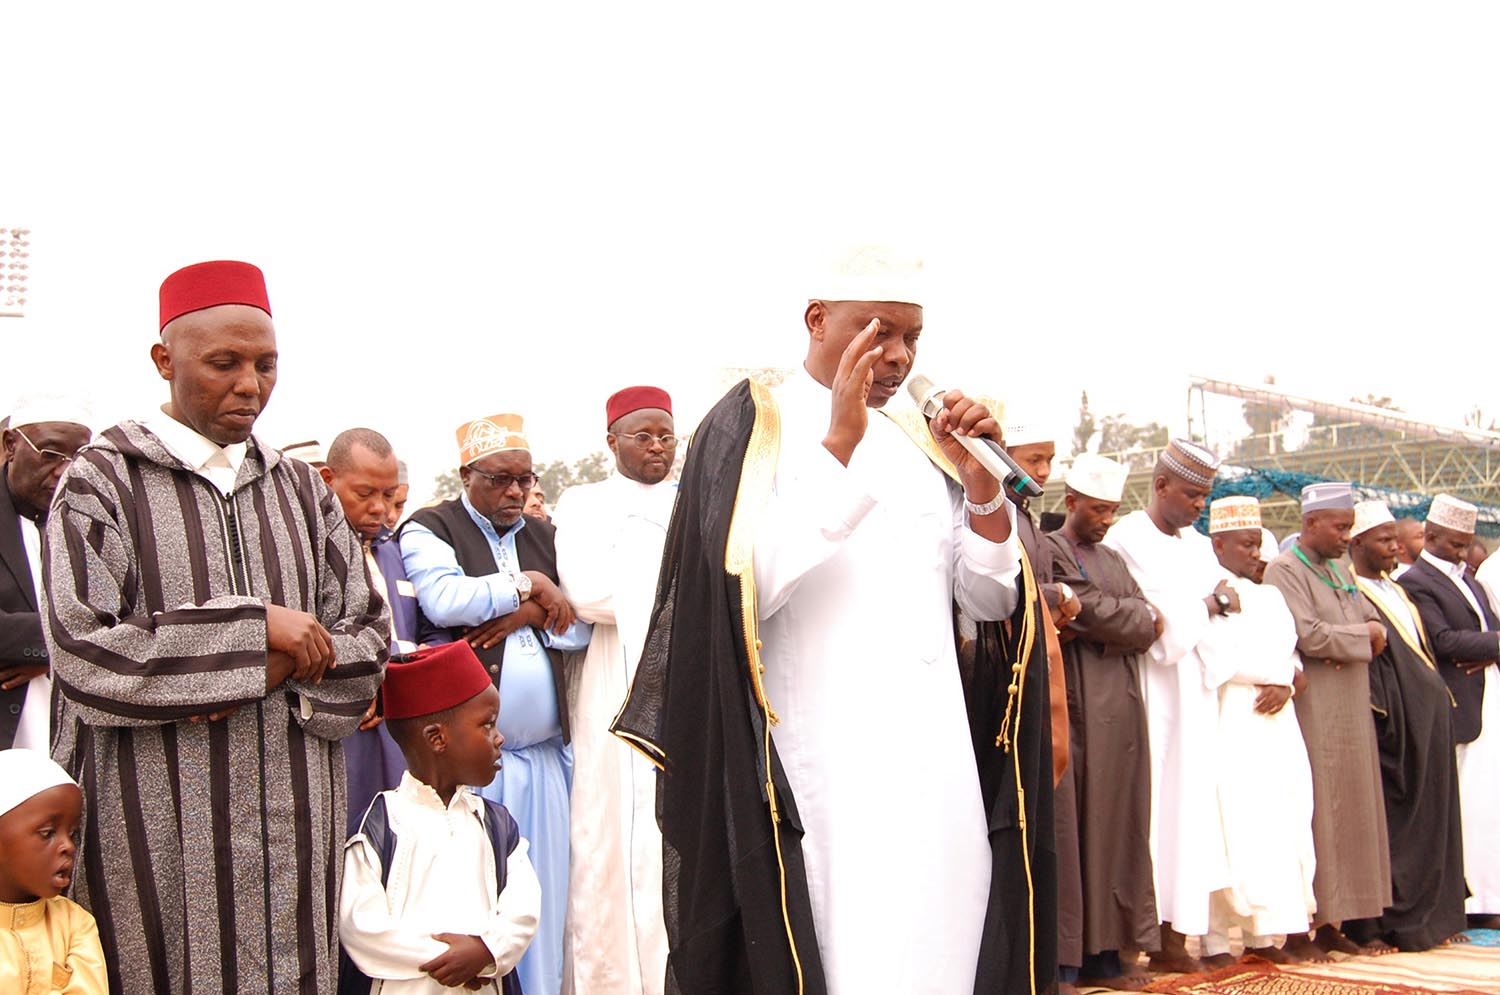 The Mufti of Rwanda, Sheikh Salim Hitimana, leads Eid al-Adha prayers at Kigali Stadium in Nyamirambo yesterday. The Mufti called on the Muslim community to dedicate their efforts in fighting drug abuse, which he said was destructive and an obstacle to progress. Frederic Byumvuhore.